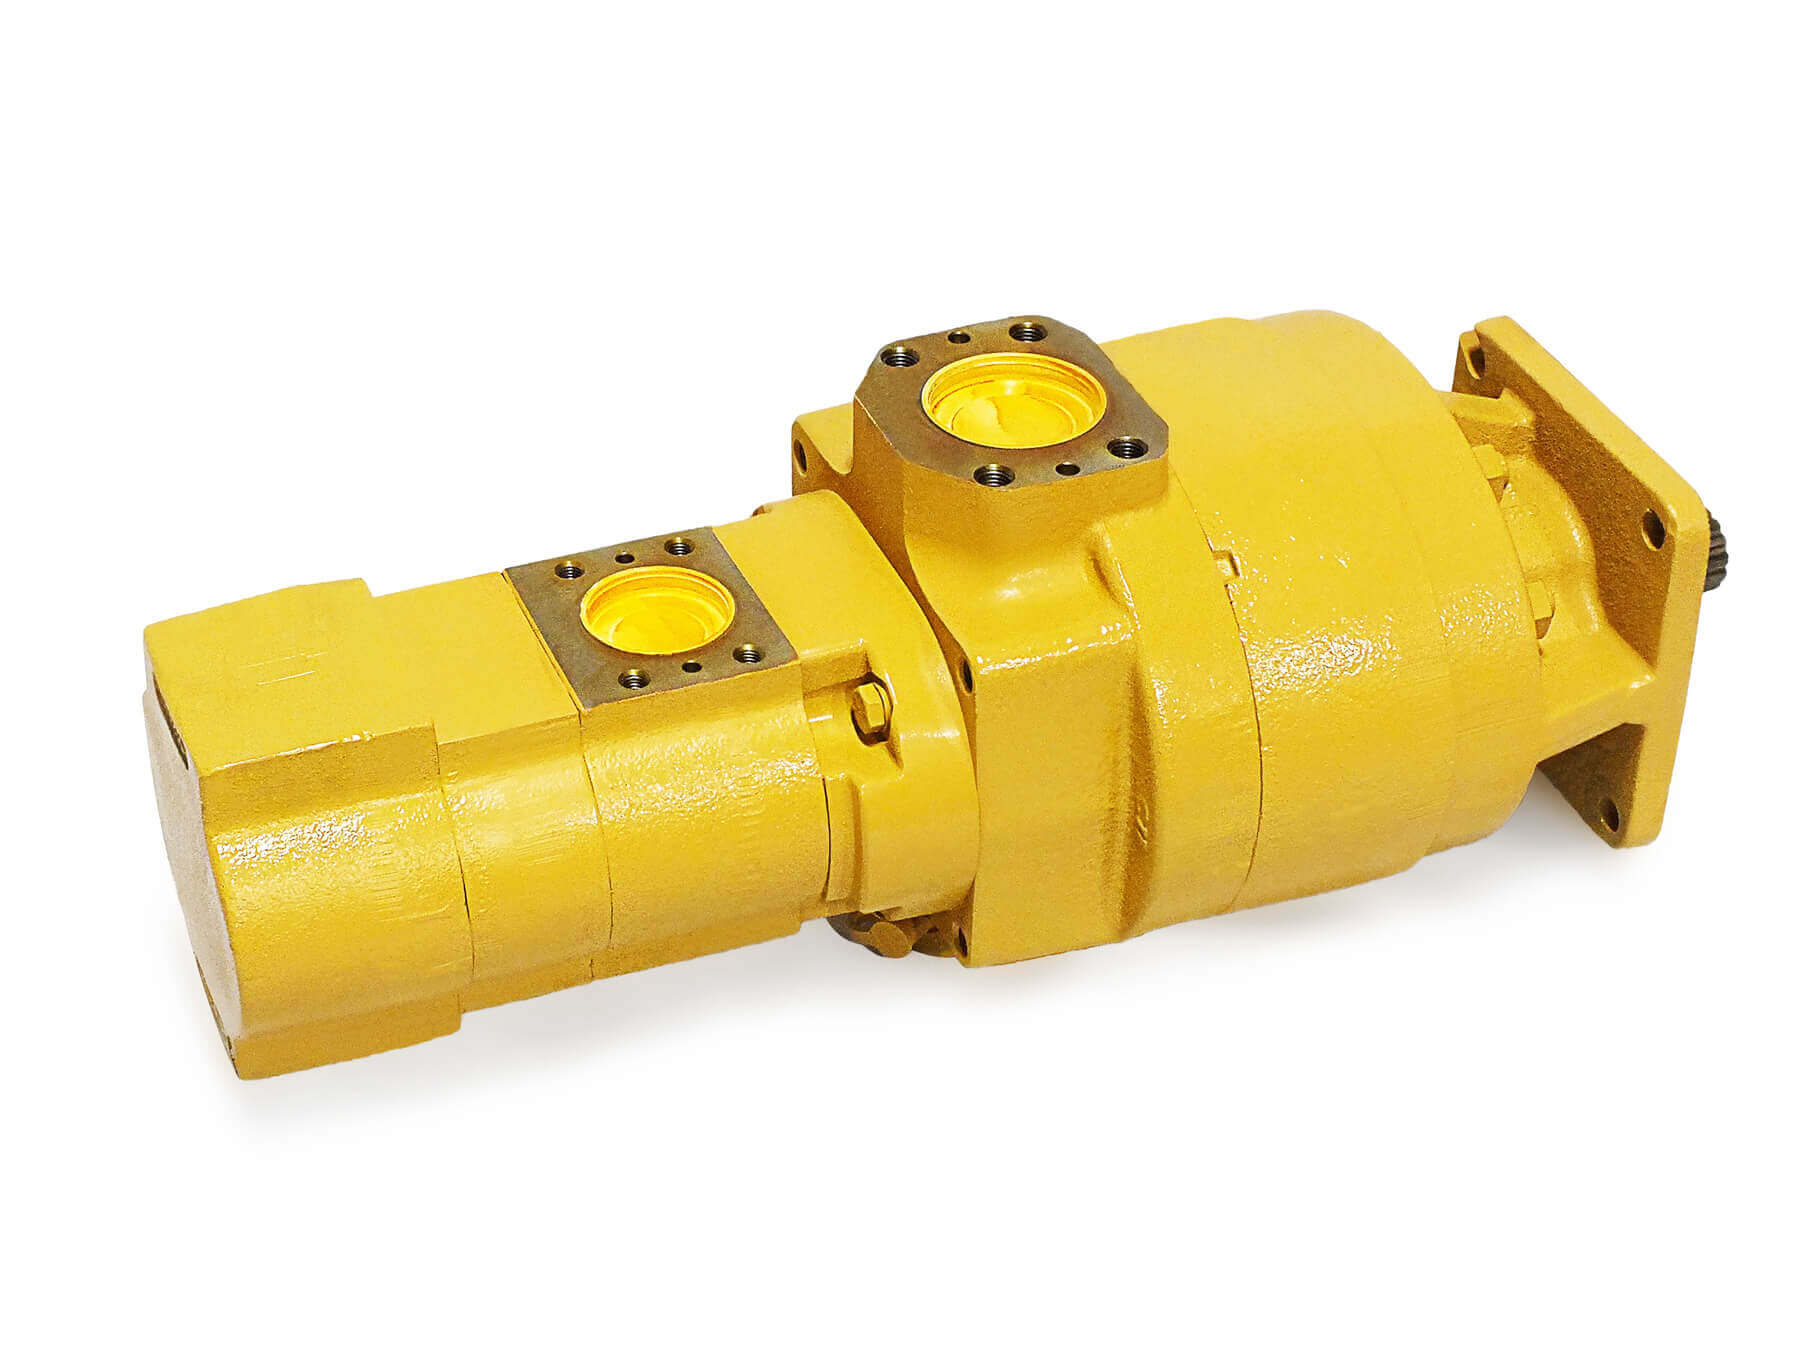 Caterpillar Hydraulic Pumps For Sale